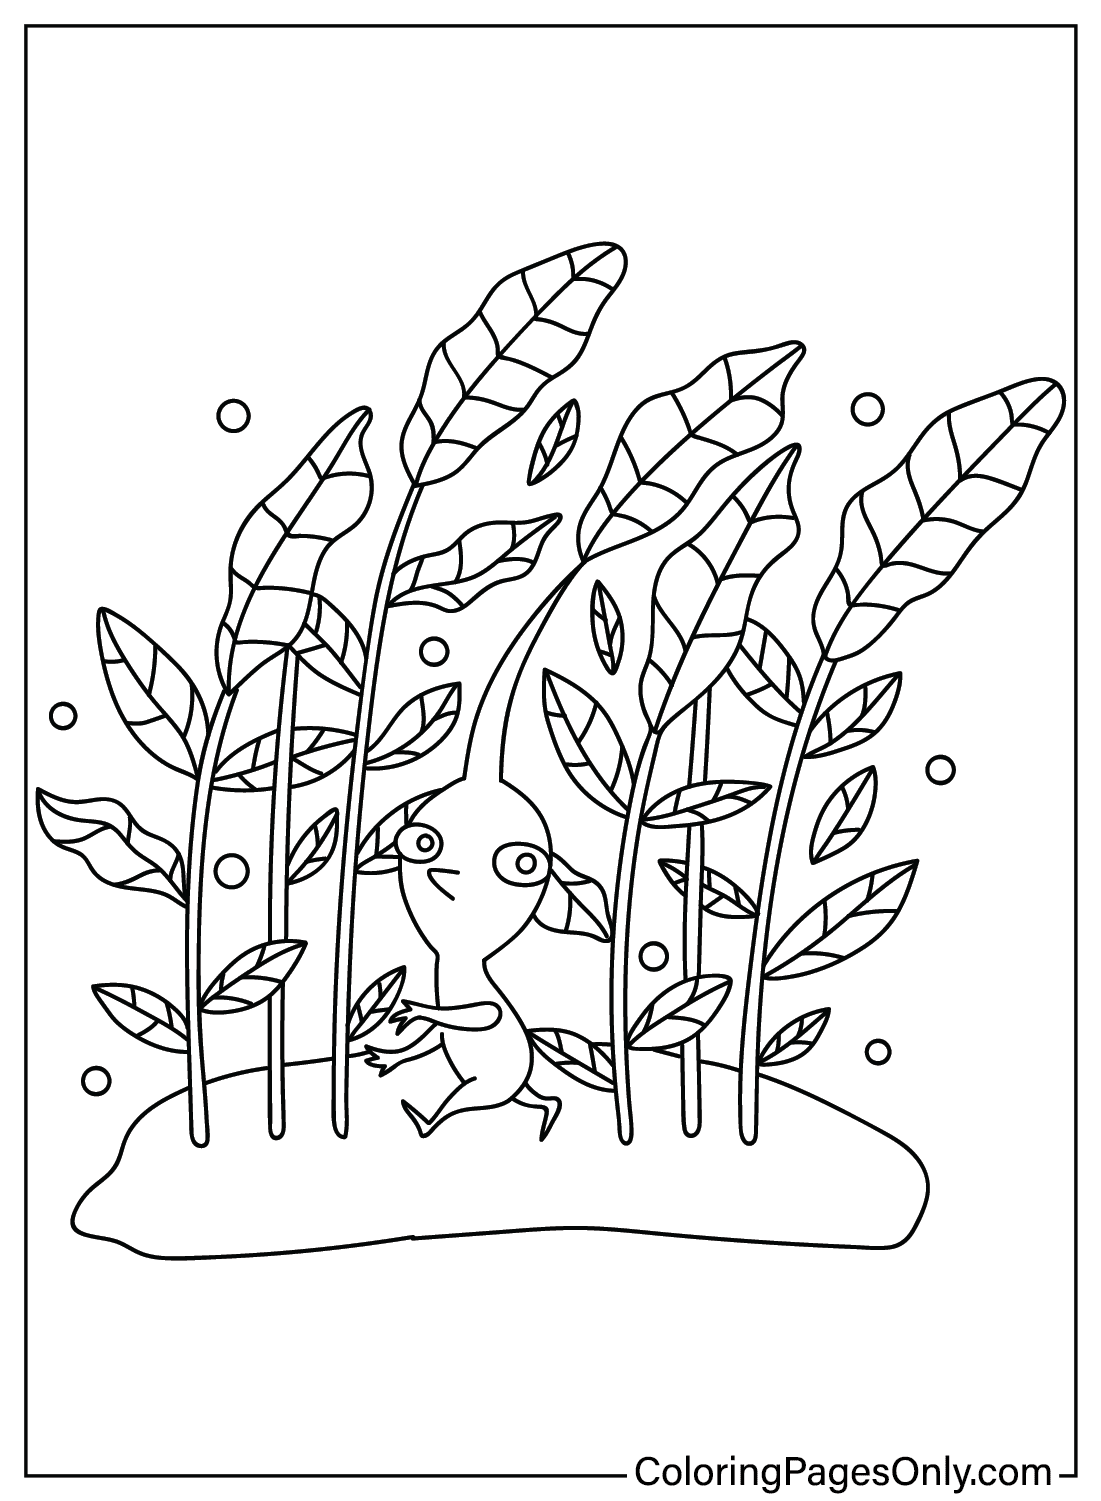 Pikmin Coloring Sheet from Pikmin